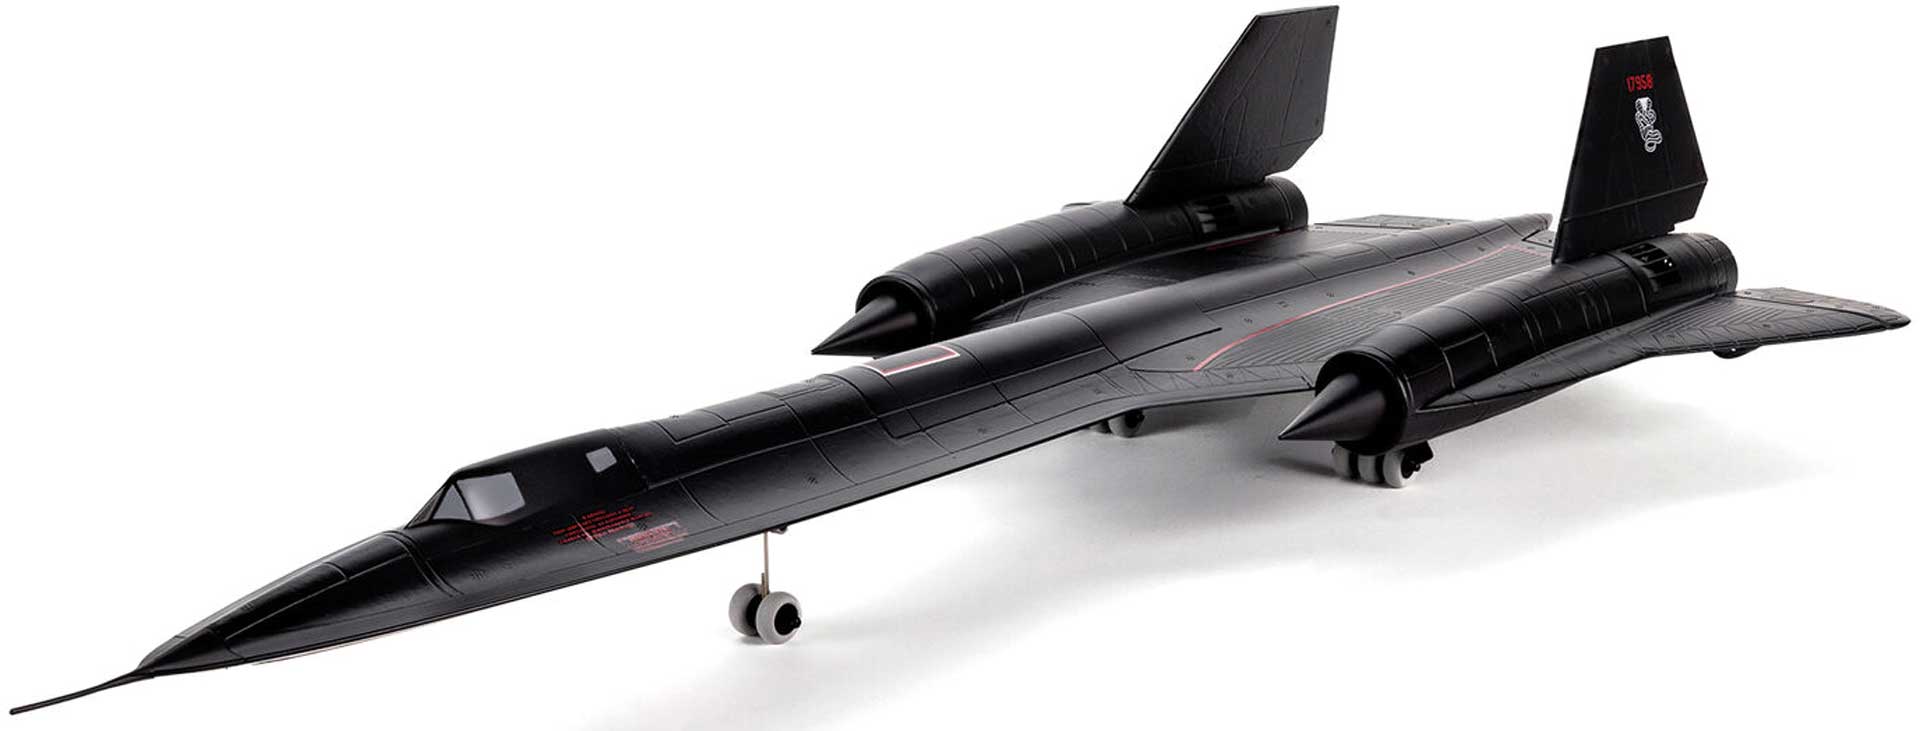 E-FLITE SR-71 Blackbird Twin 40mm EDF BNF Basic with AS3X and SAFE Select